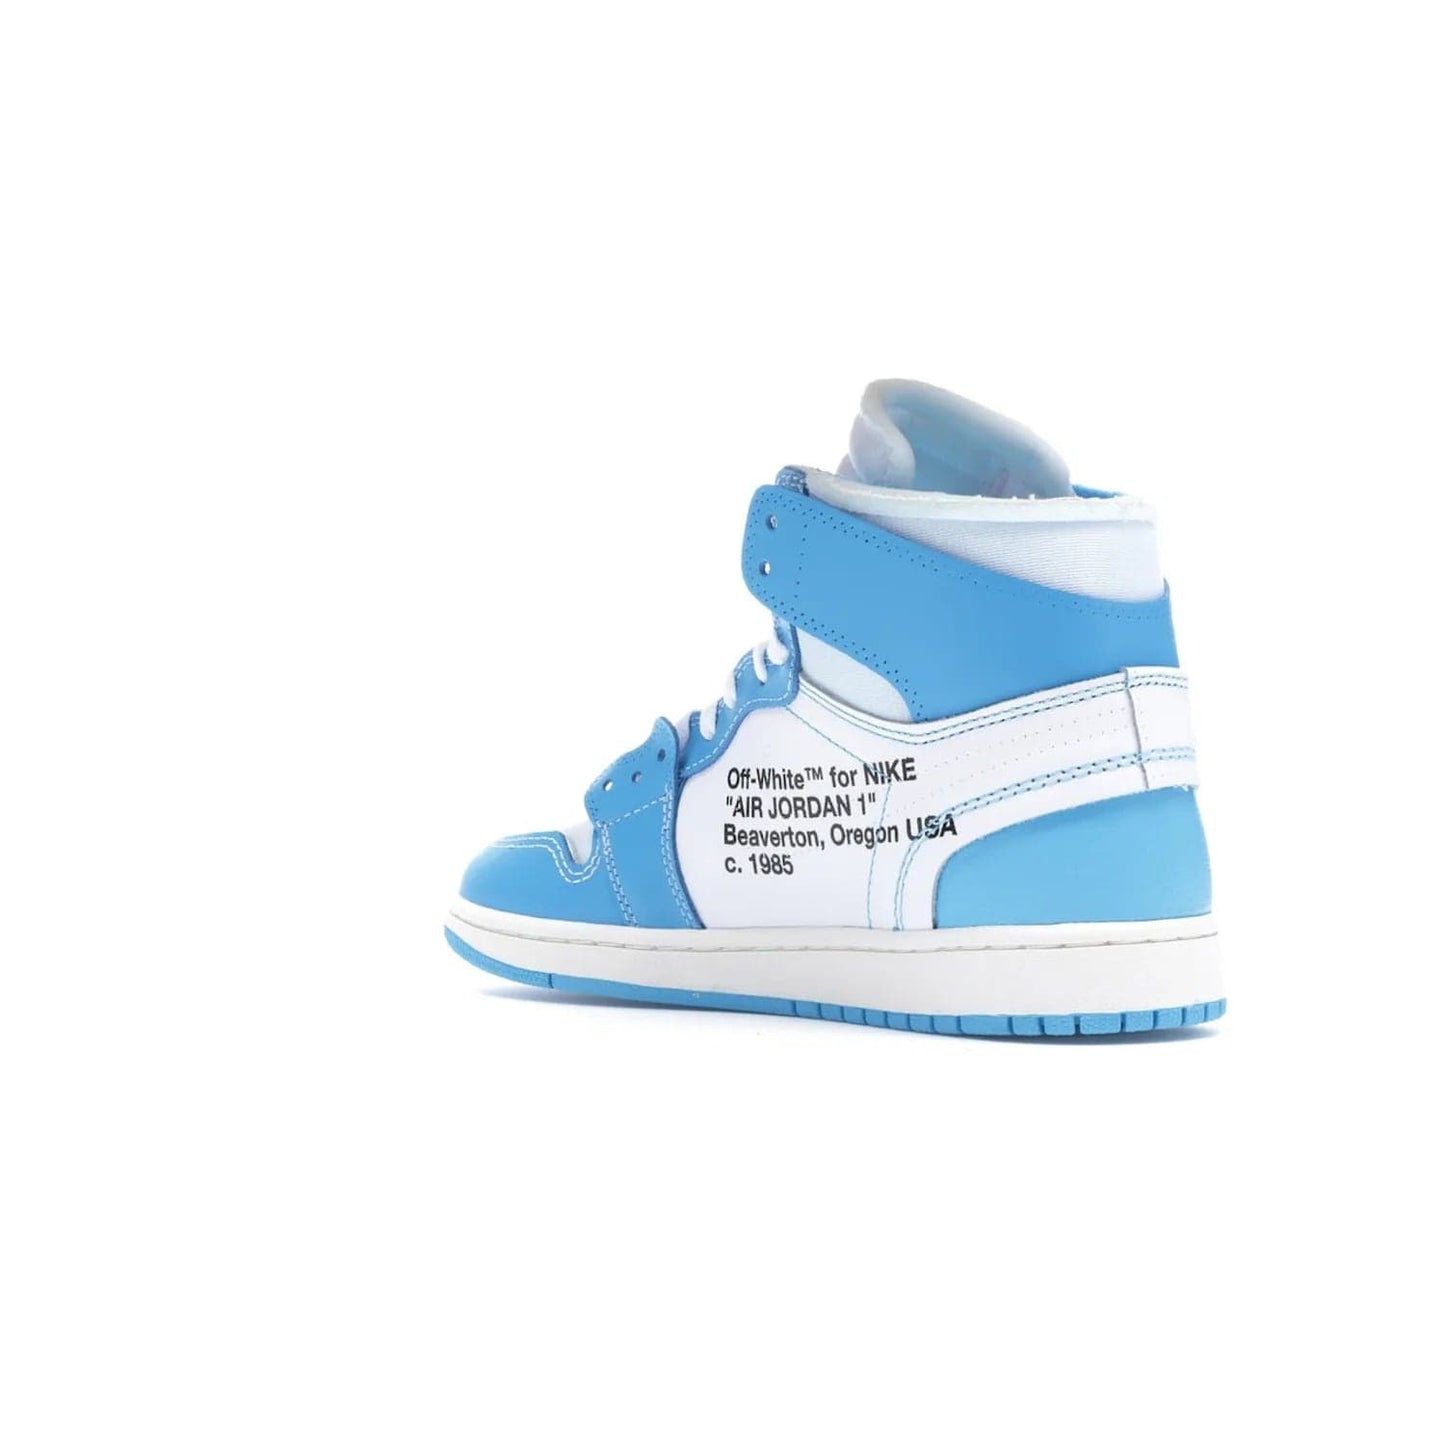 Jordan 1 Retro High Off-White University Blue - Image 24 - Only at www.BallersClubKickz.com - Classic Jordan 1 Retro High "Off-White UNC" sneakers meld style and comfort. Boasting deconstructed white and blue leather, Off-White detailing, and a white, dark powder blue and cone colorway, these sneakers are perfect for dressing up or down. Get the iconic Off-White Jordan 1's and upgrade your look.